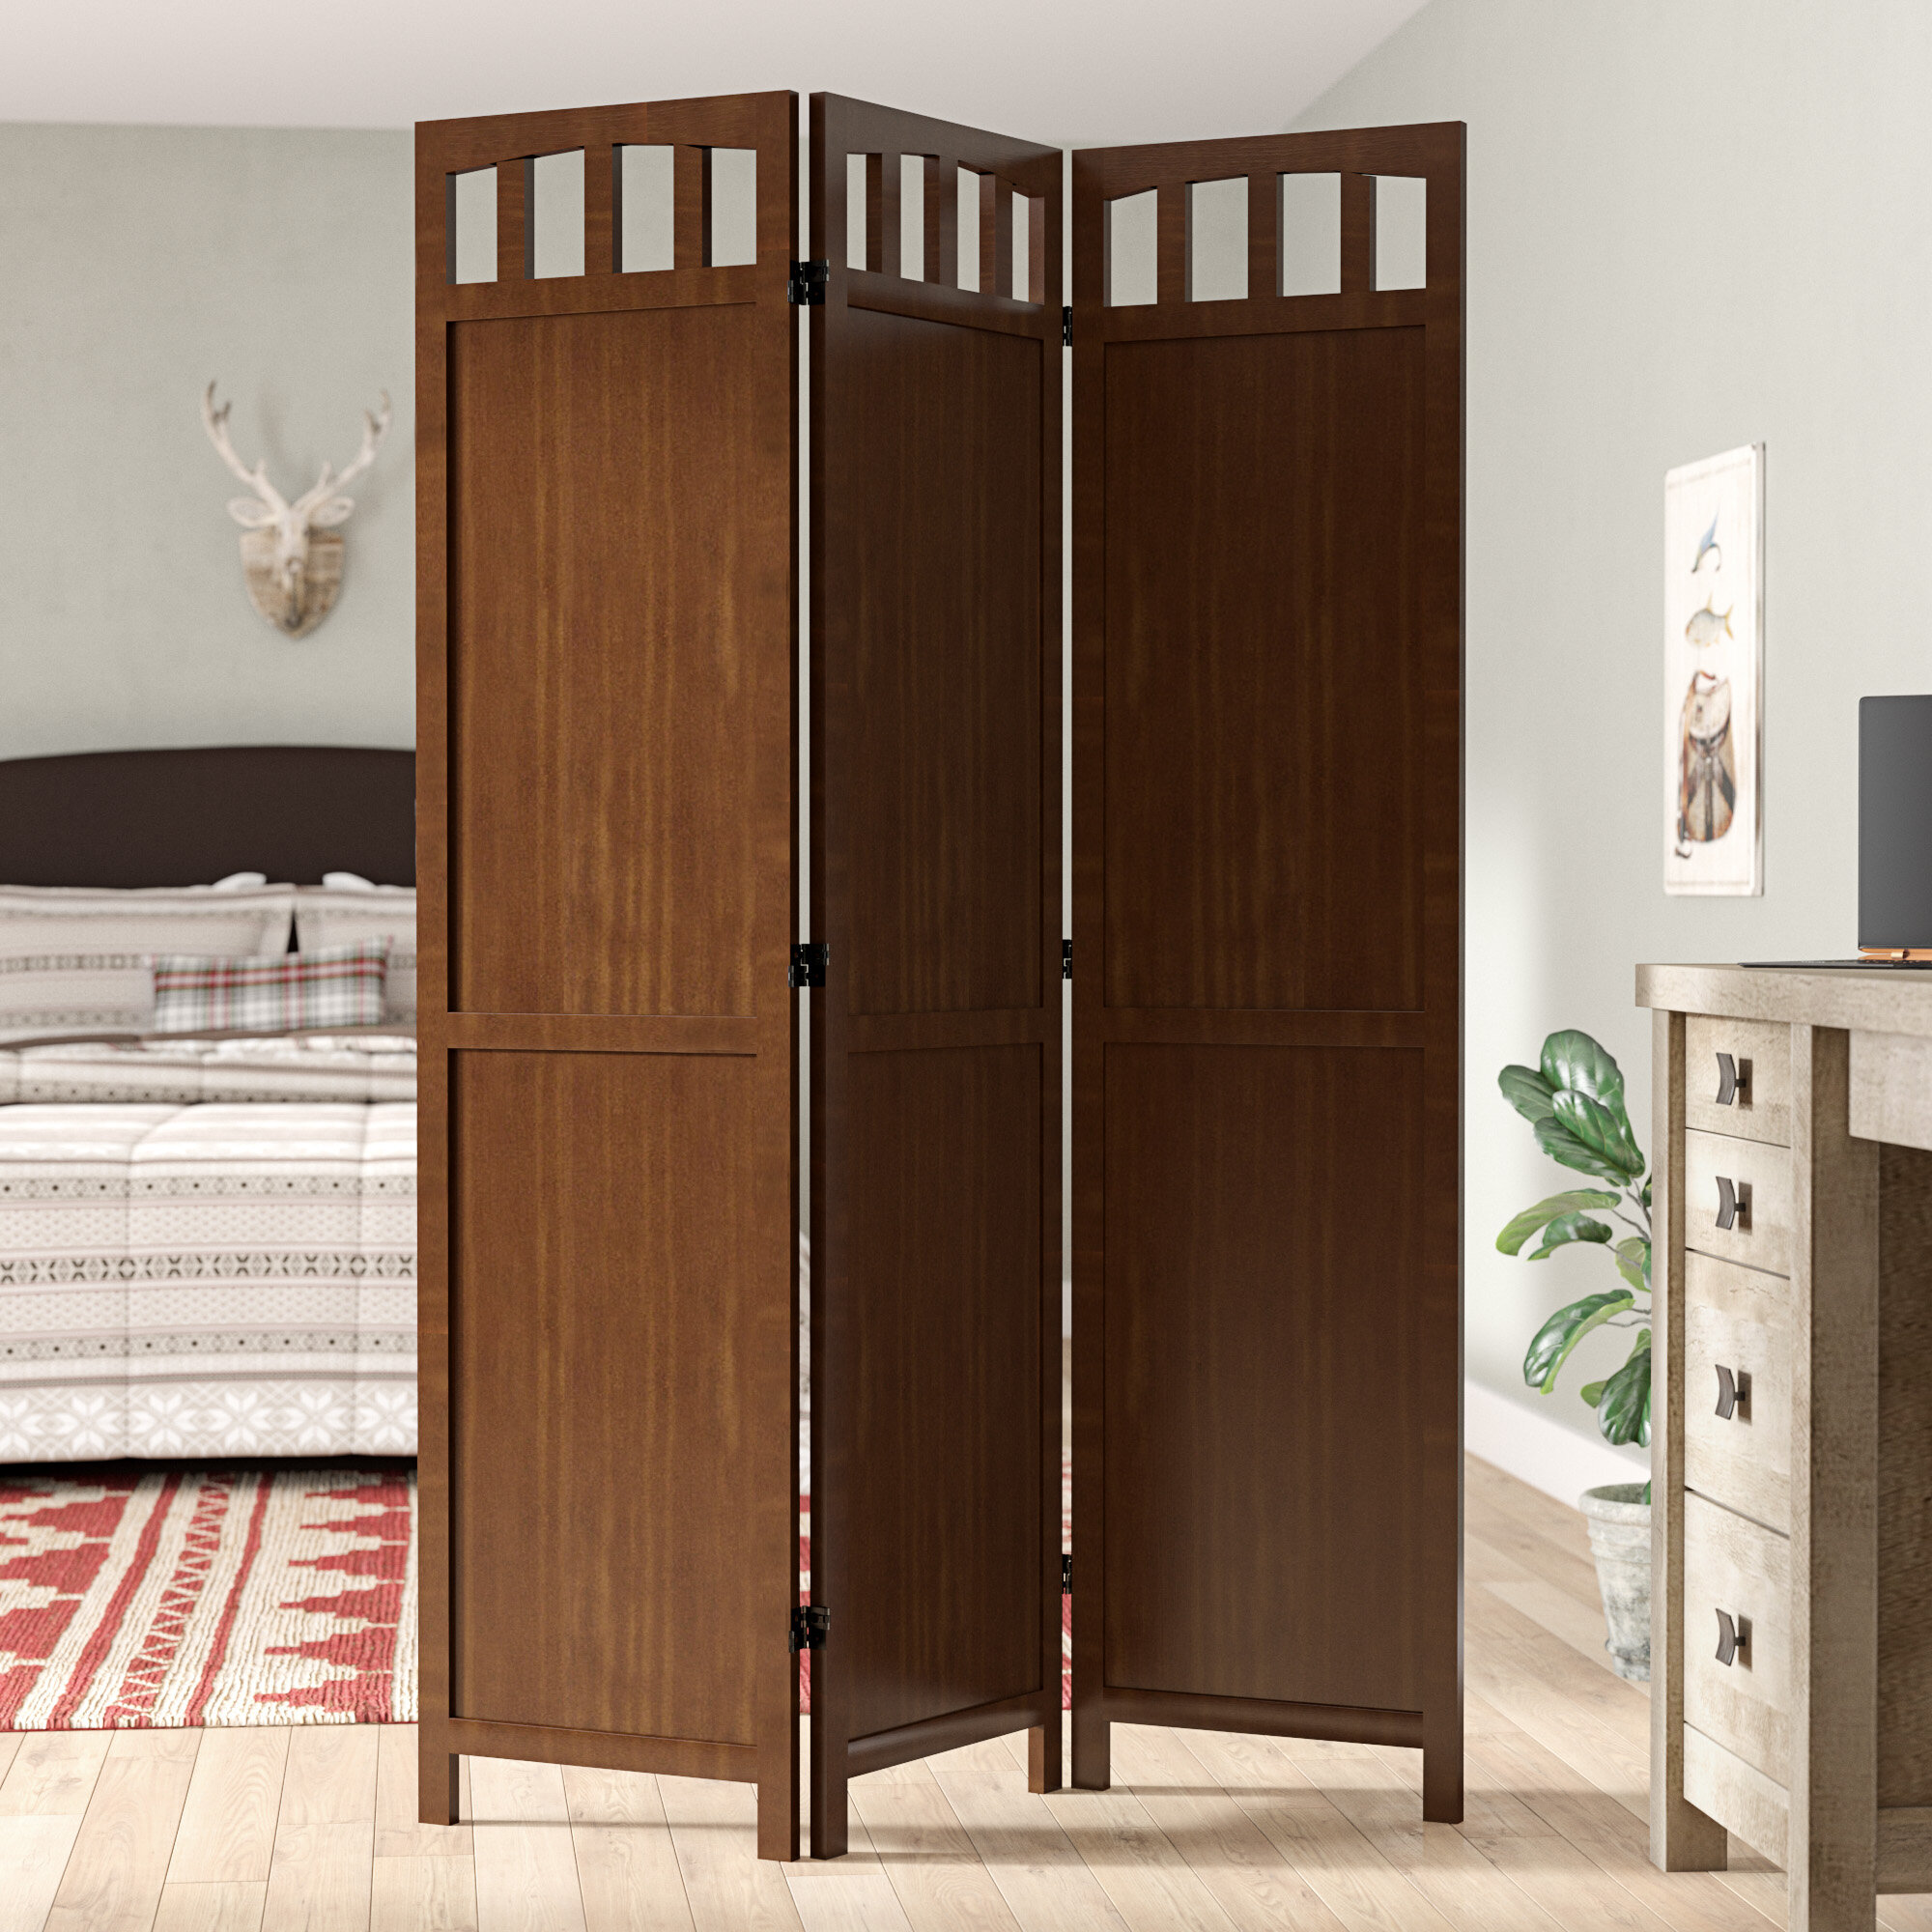 3 or 4 Panel Solid Wood Room Screen Divider Walnut Finish